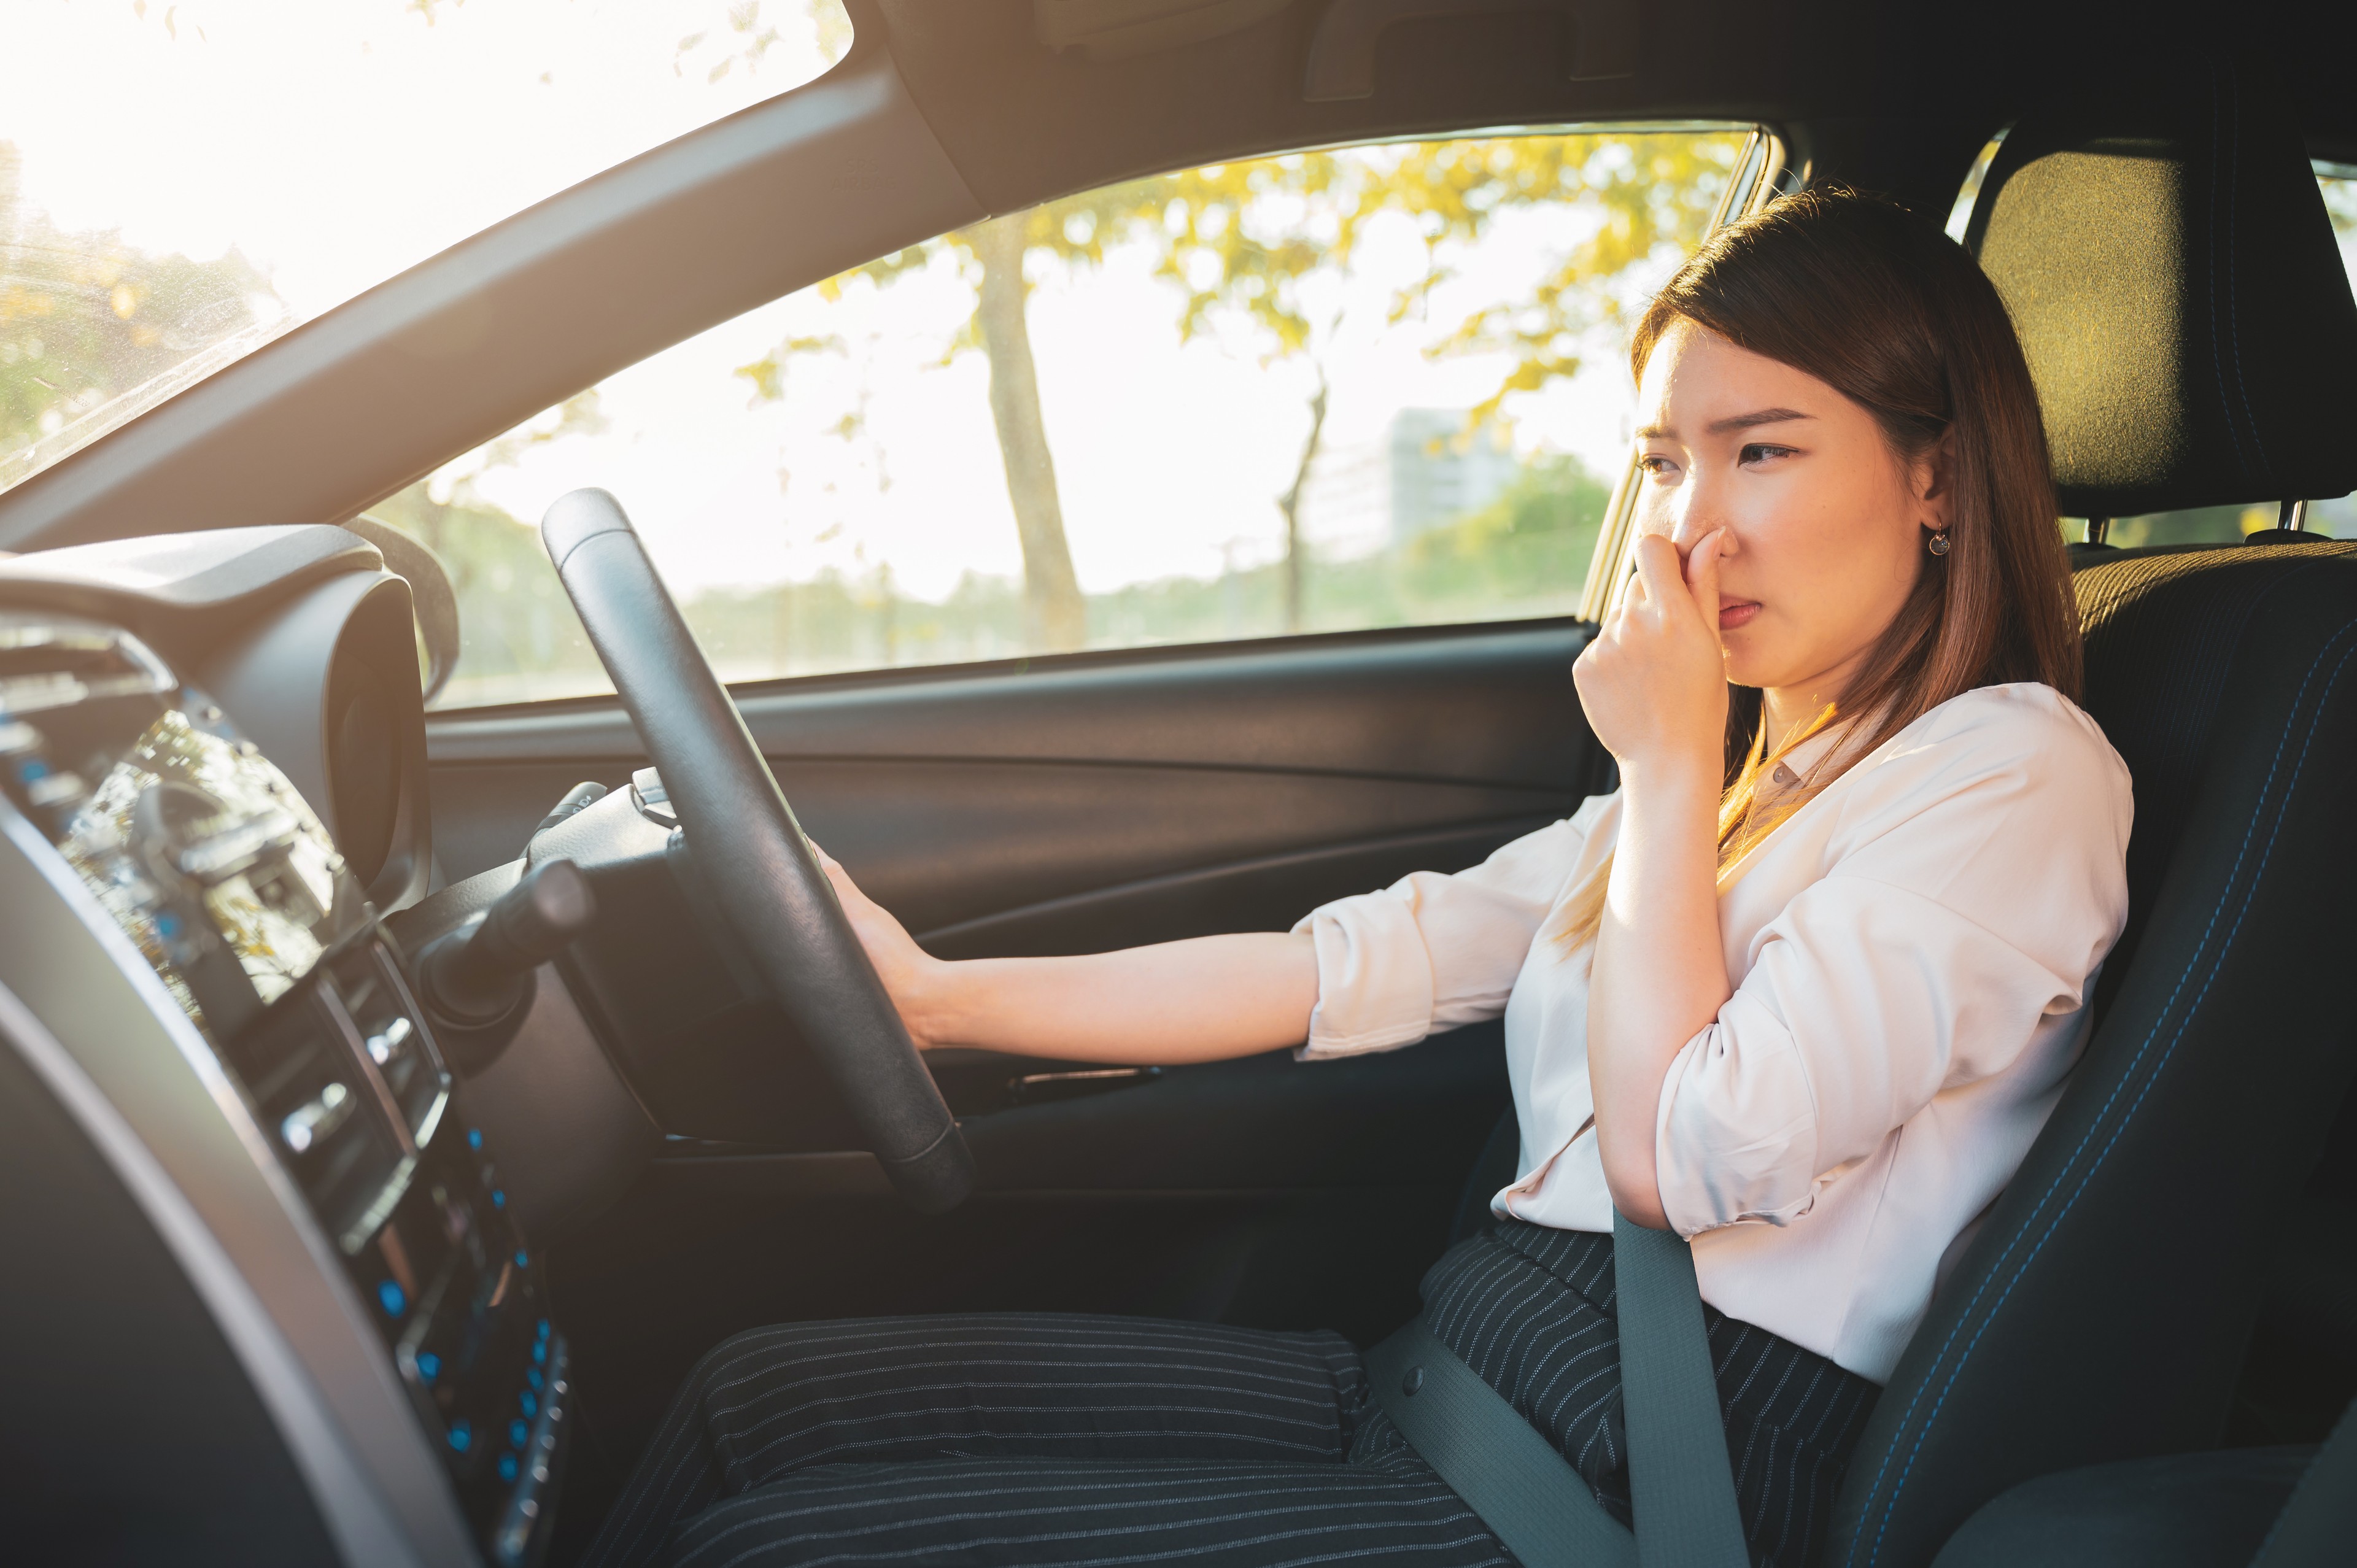 Figuring Out Why Your Car Smells Weird and What to Do